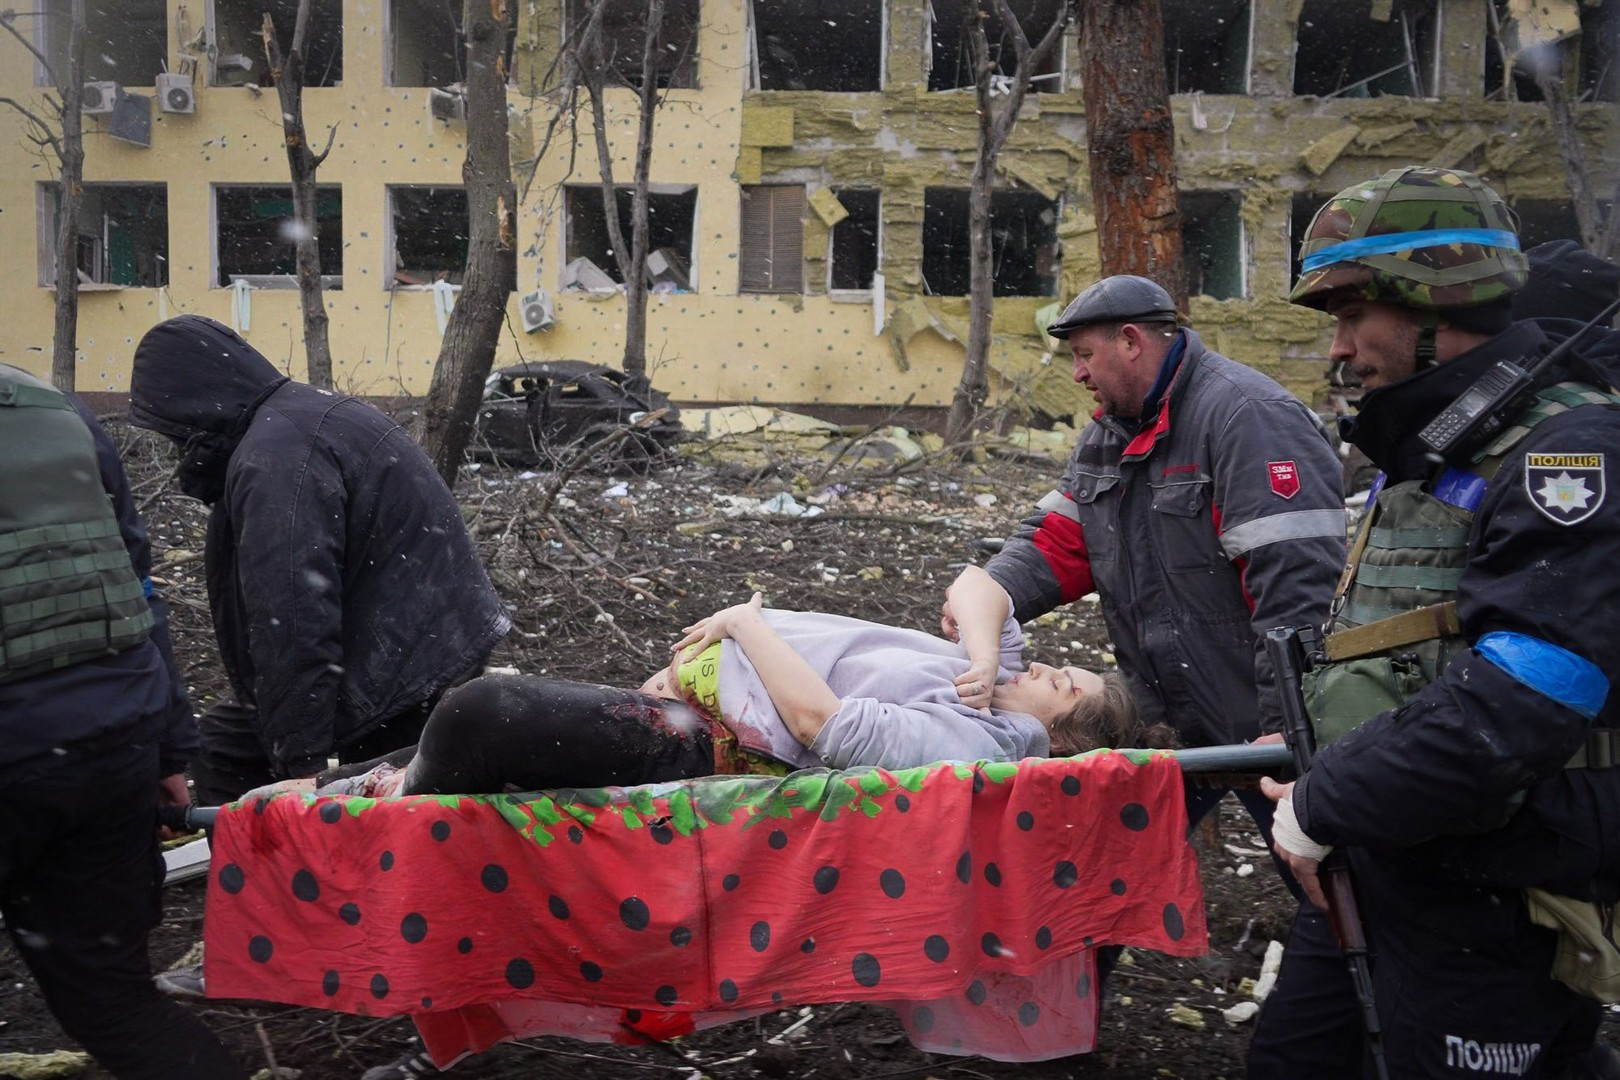 Ukrainian emergency workers and volunteers carry an injured pregnant woman from a maternity hospital damaged by an airstrike in Mariupol, Ukraine, March 9, 2022. Still from FRONTLINE PBS and AP’s feature film “20 Days in Mariupol.”
CREDIT: (AP Photo/Evgeniy Maloletka)
